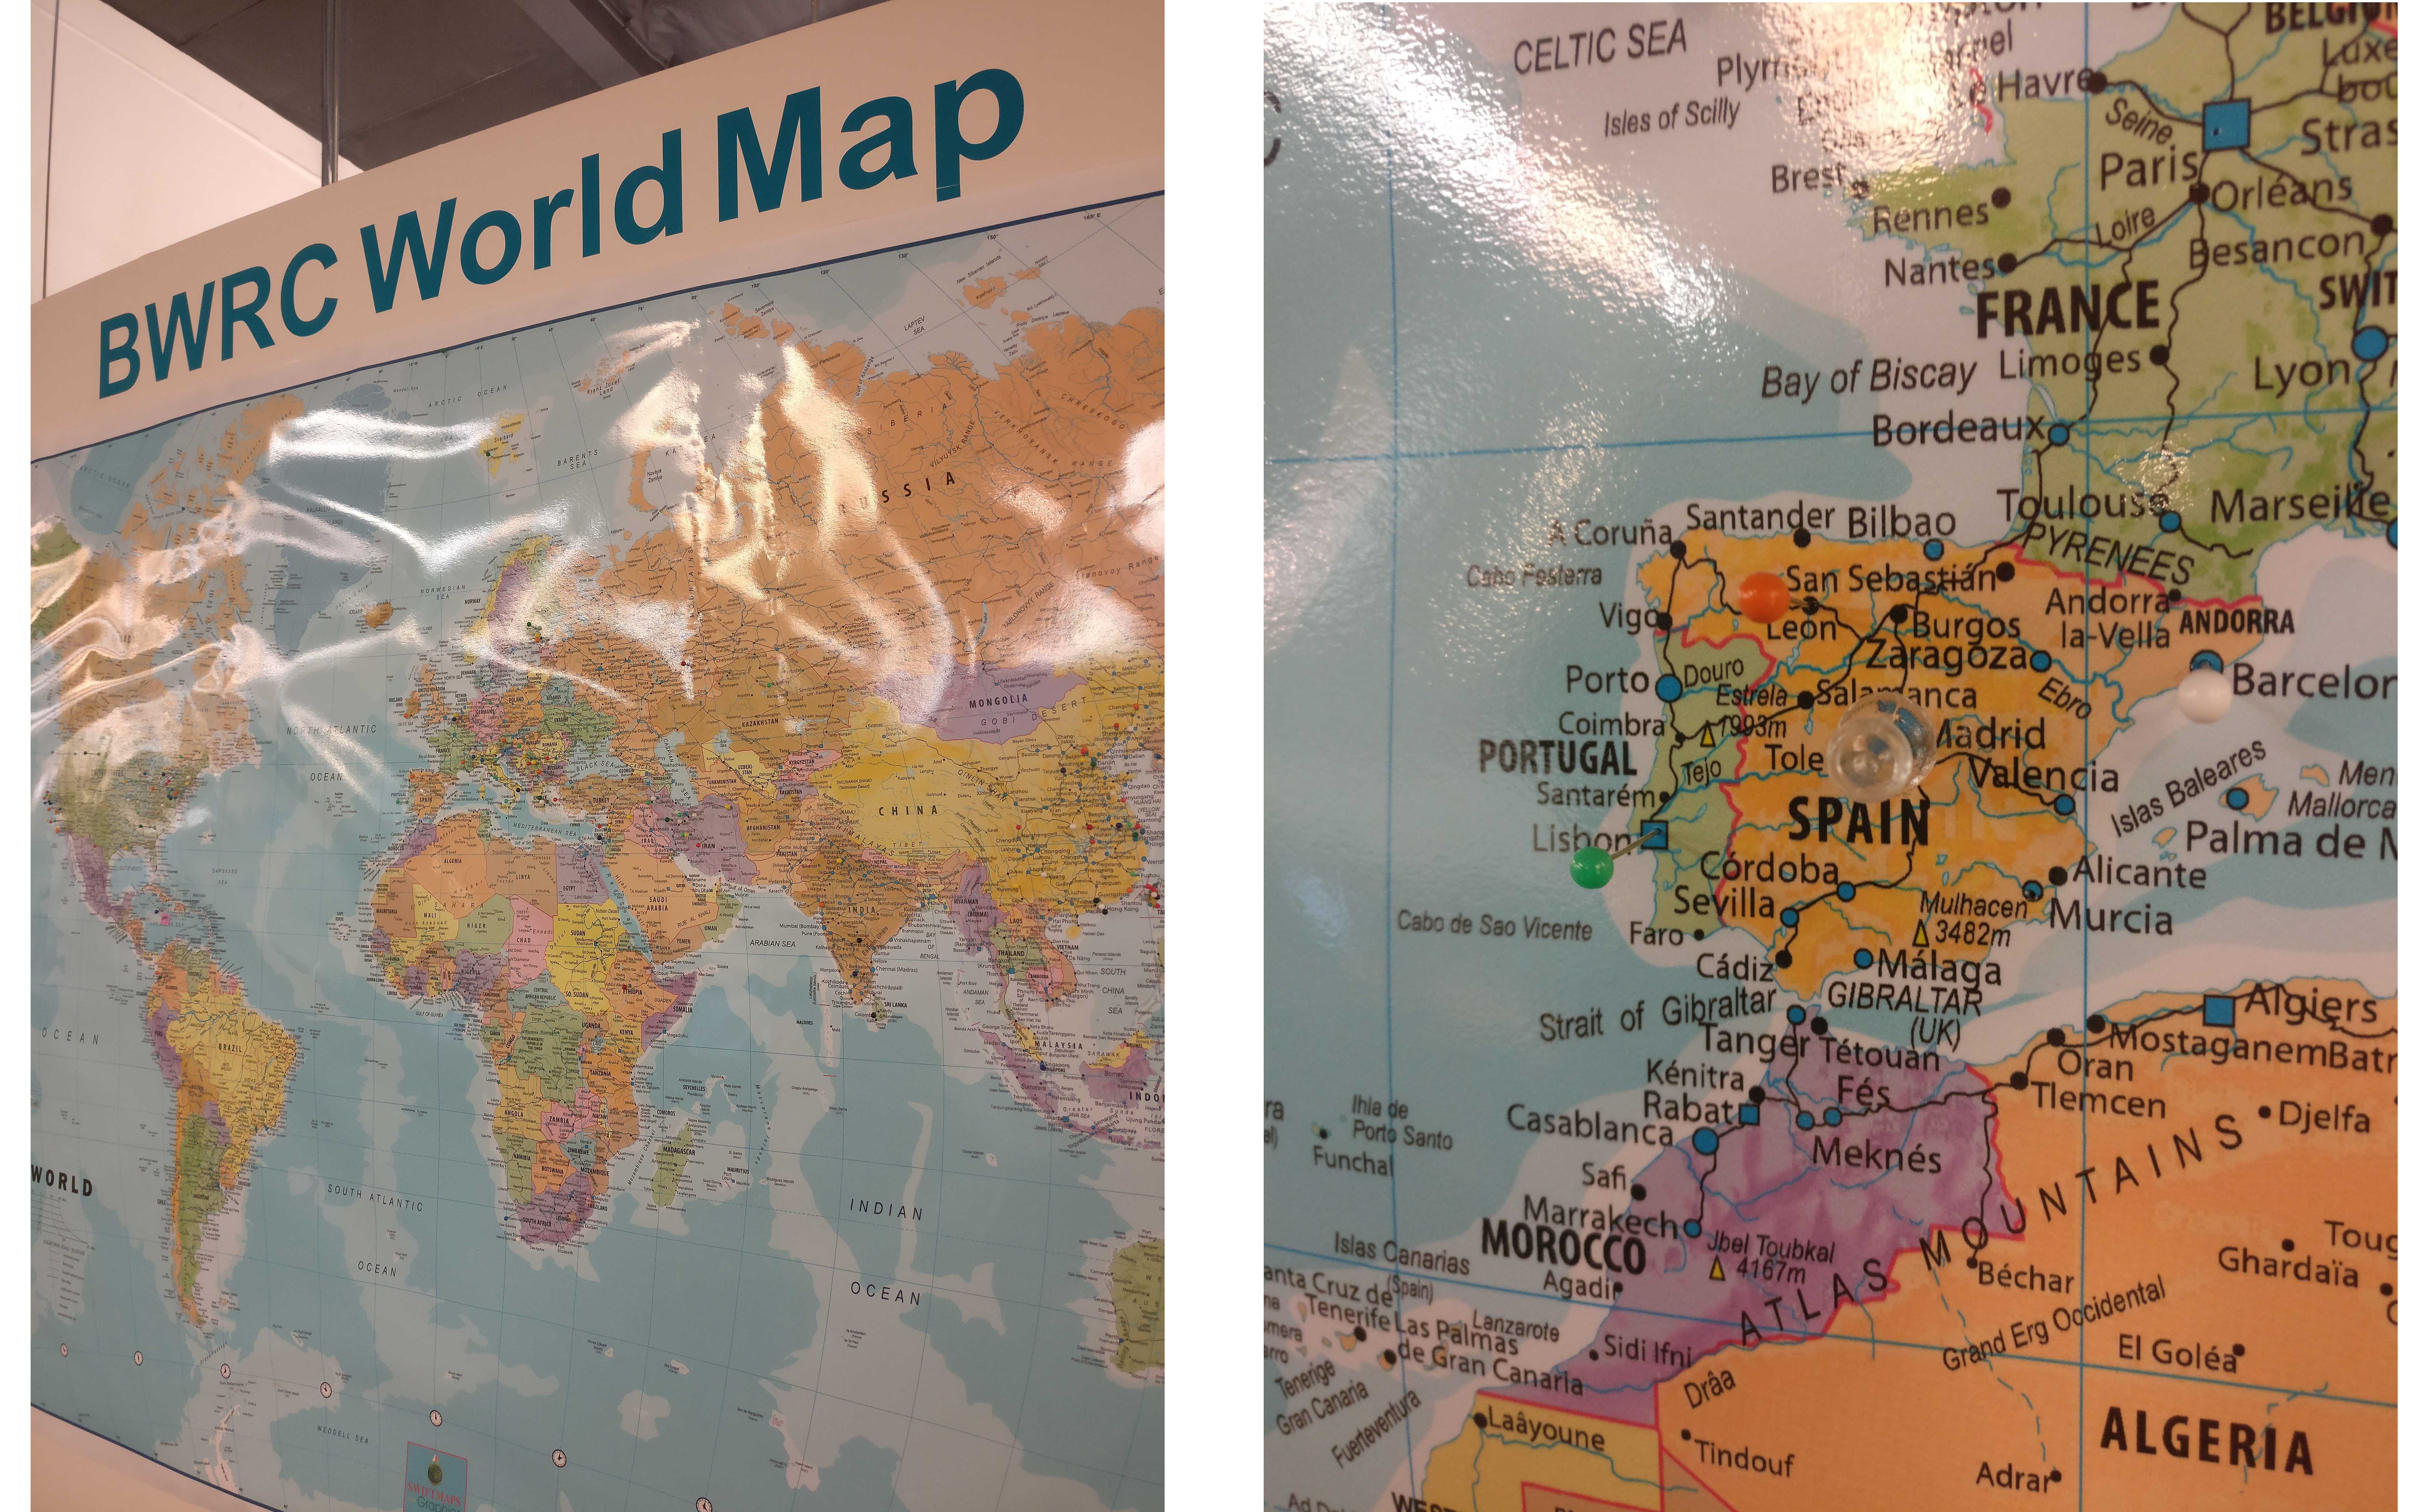 World Map with location pins for every BWRC member